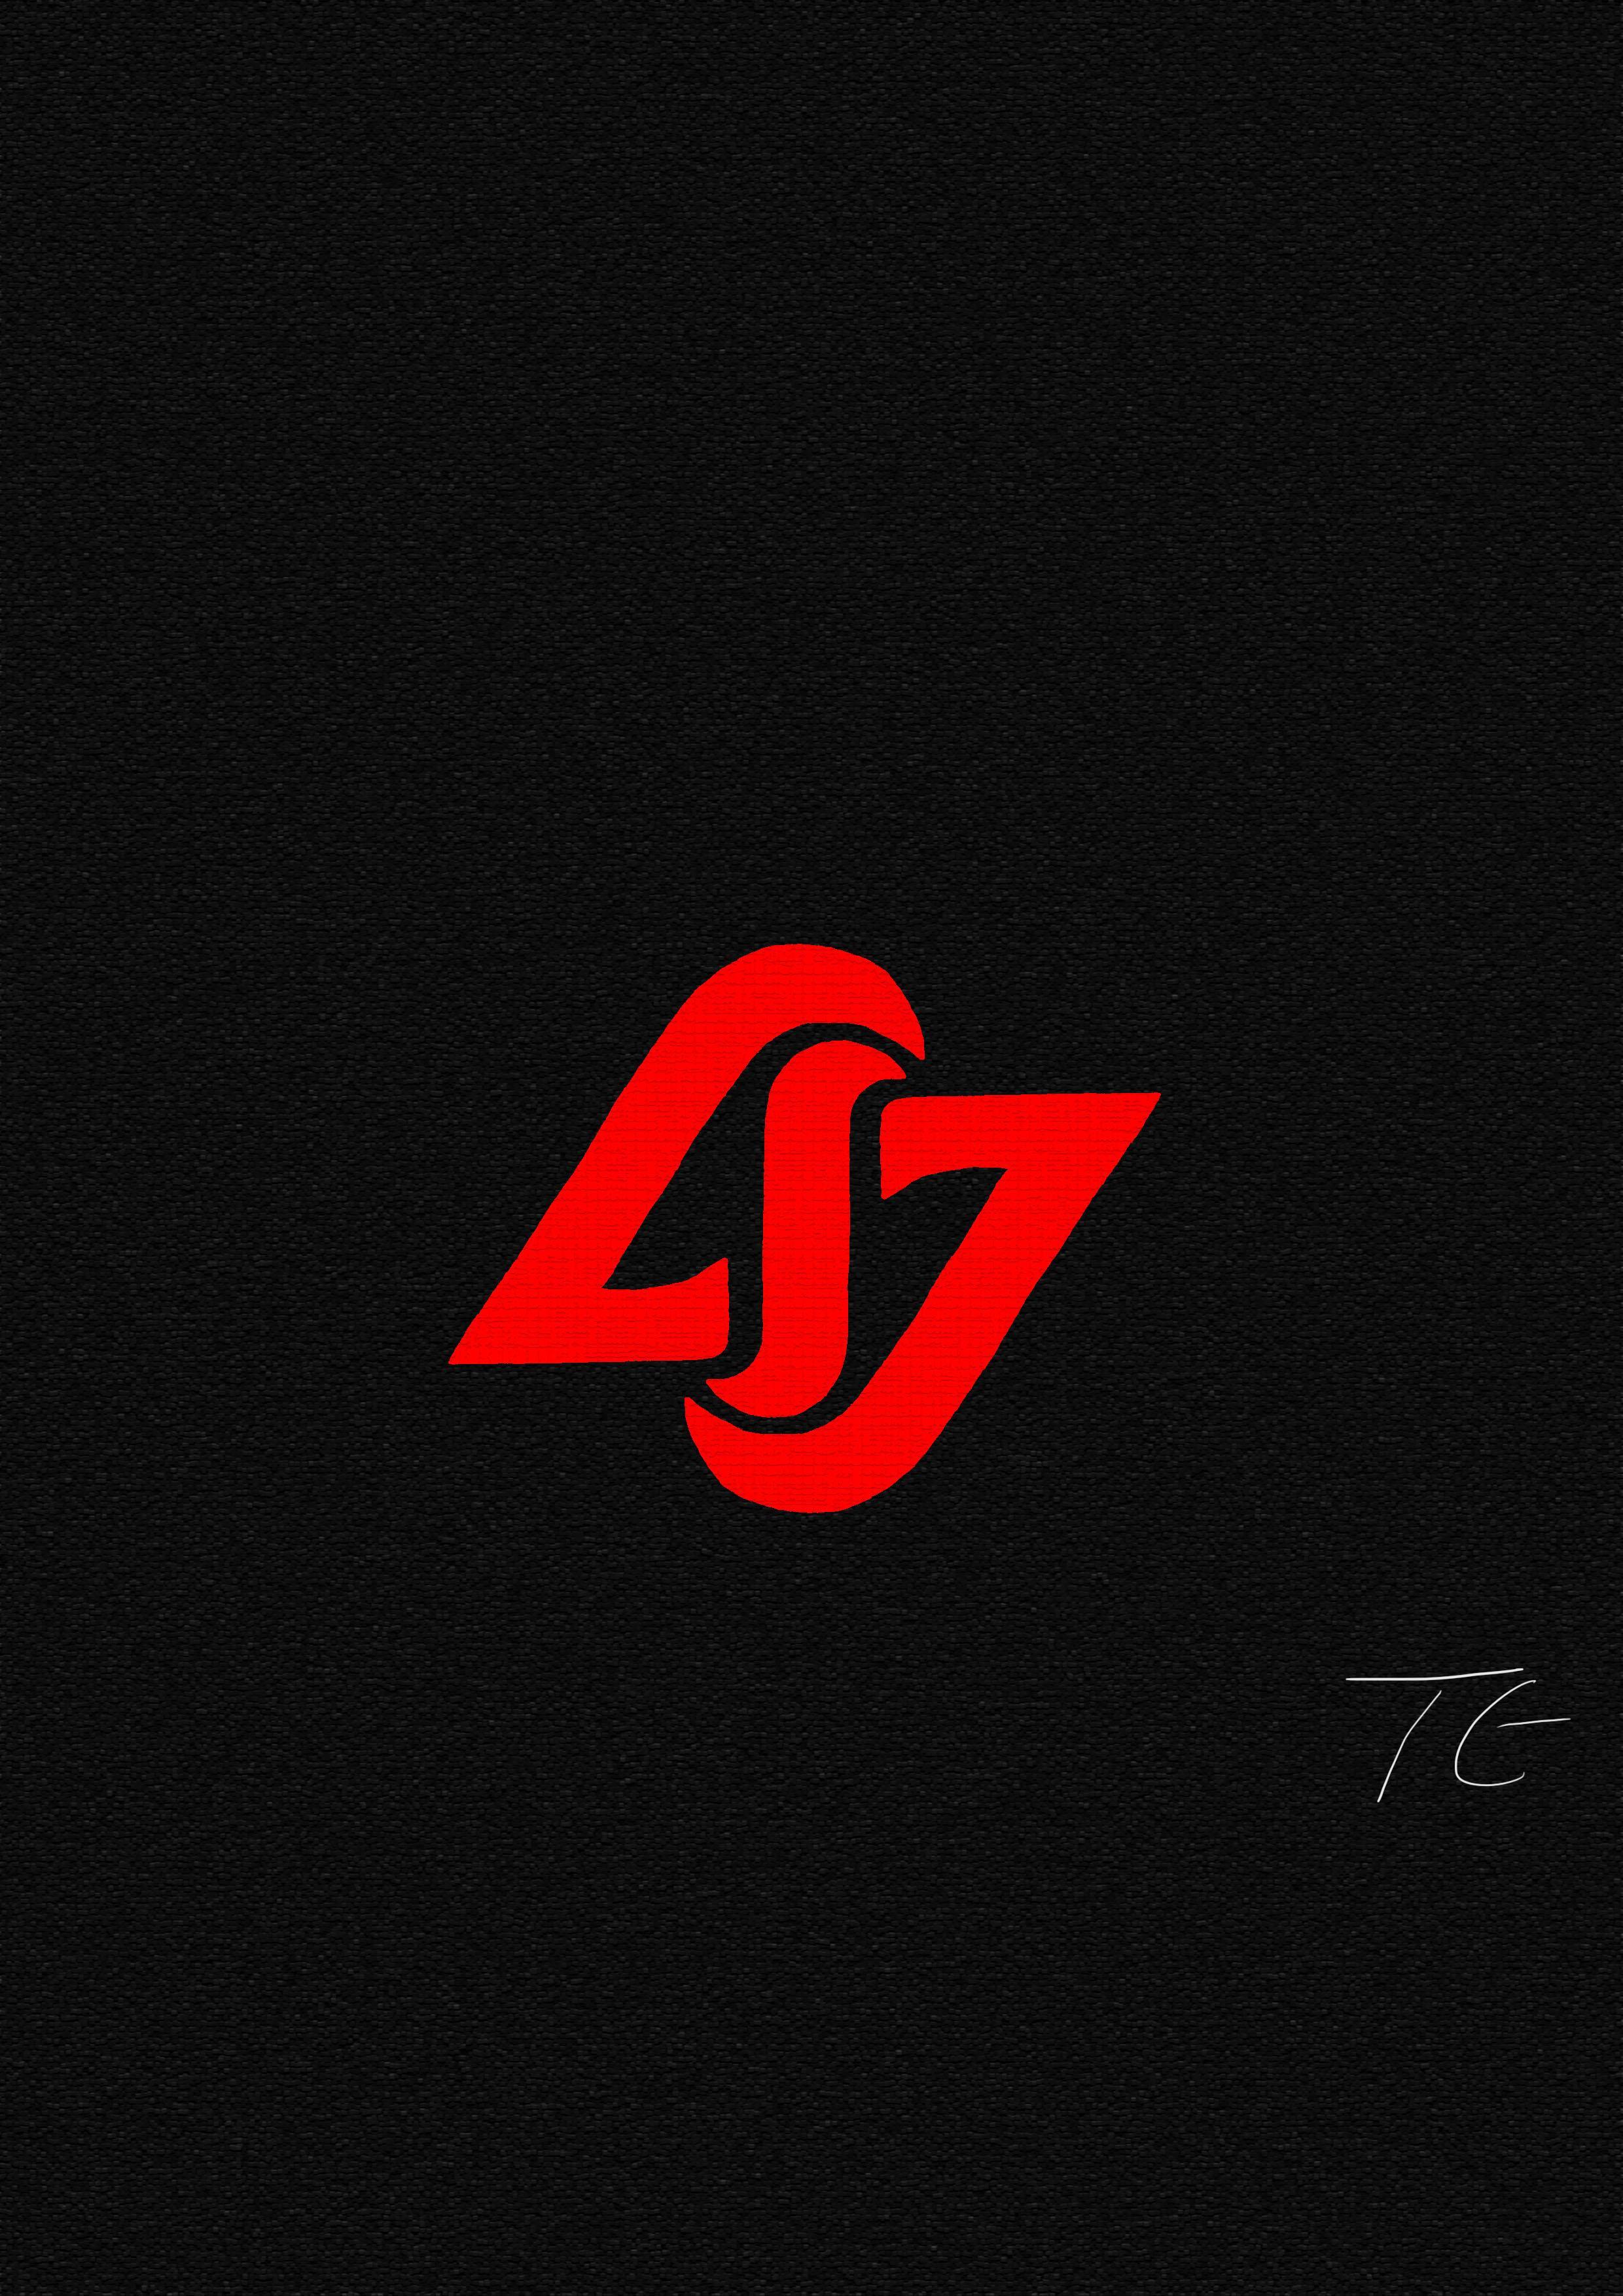 CLG Logo - Community] Just finished taking a shot at hand drawing a clg logo. : CLG